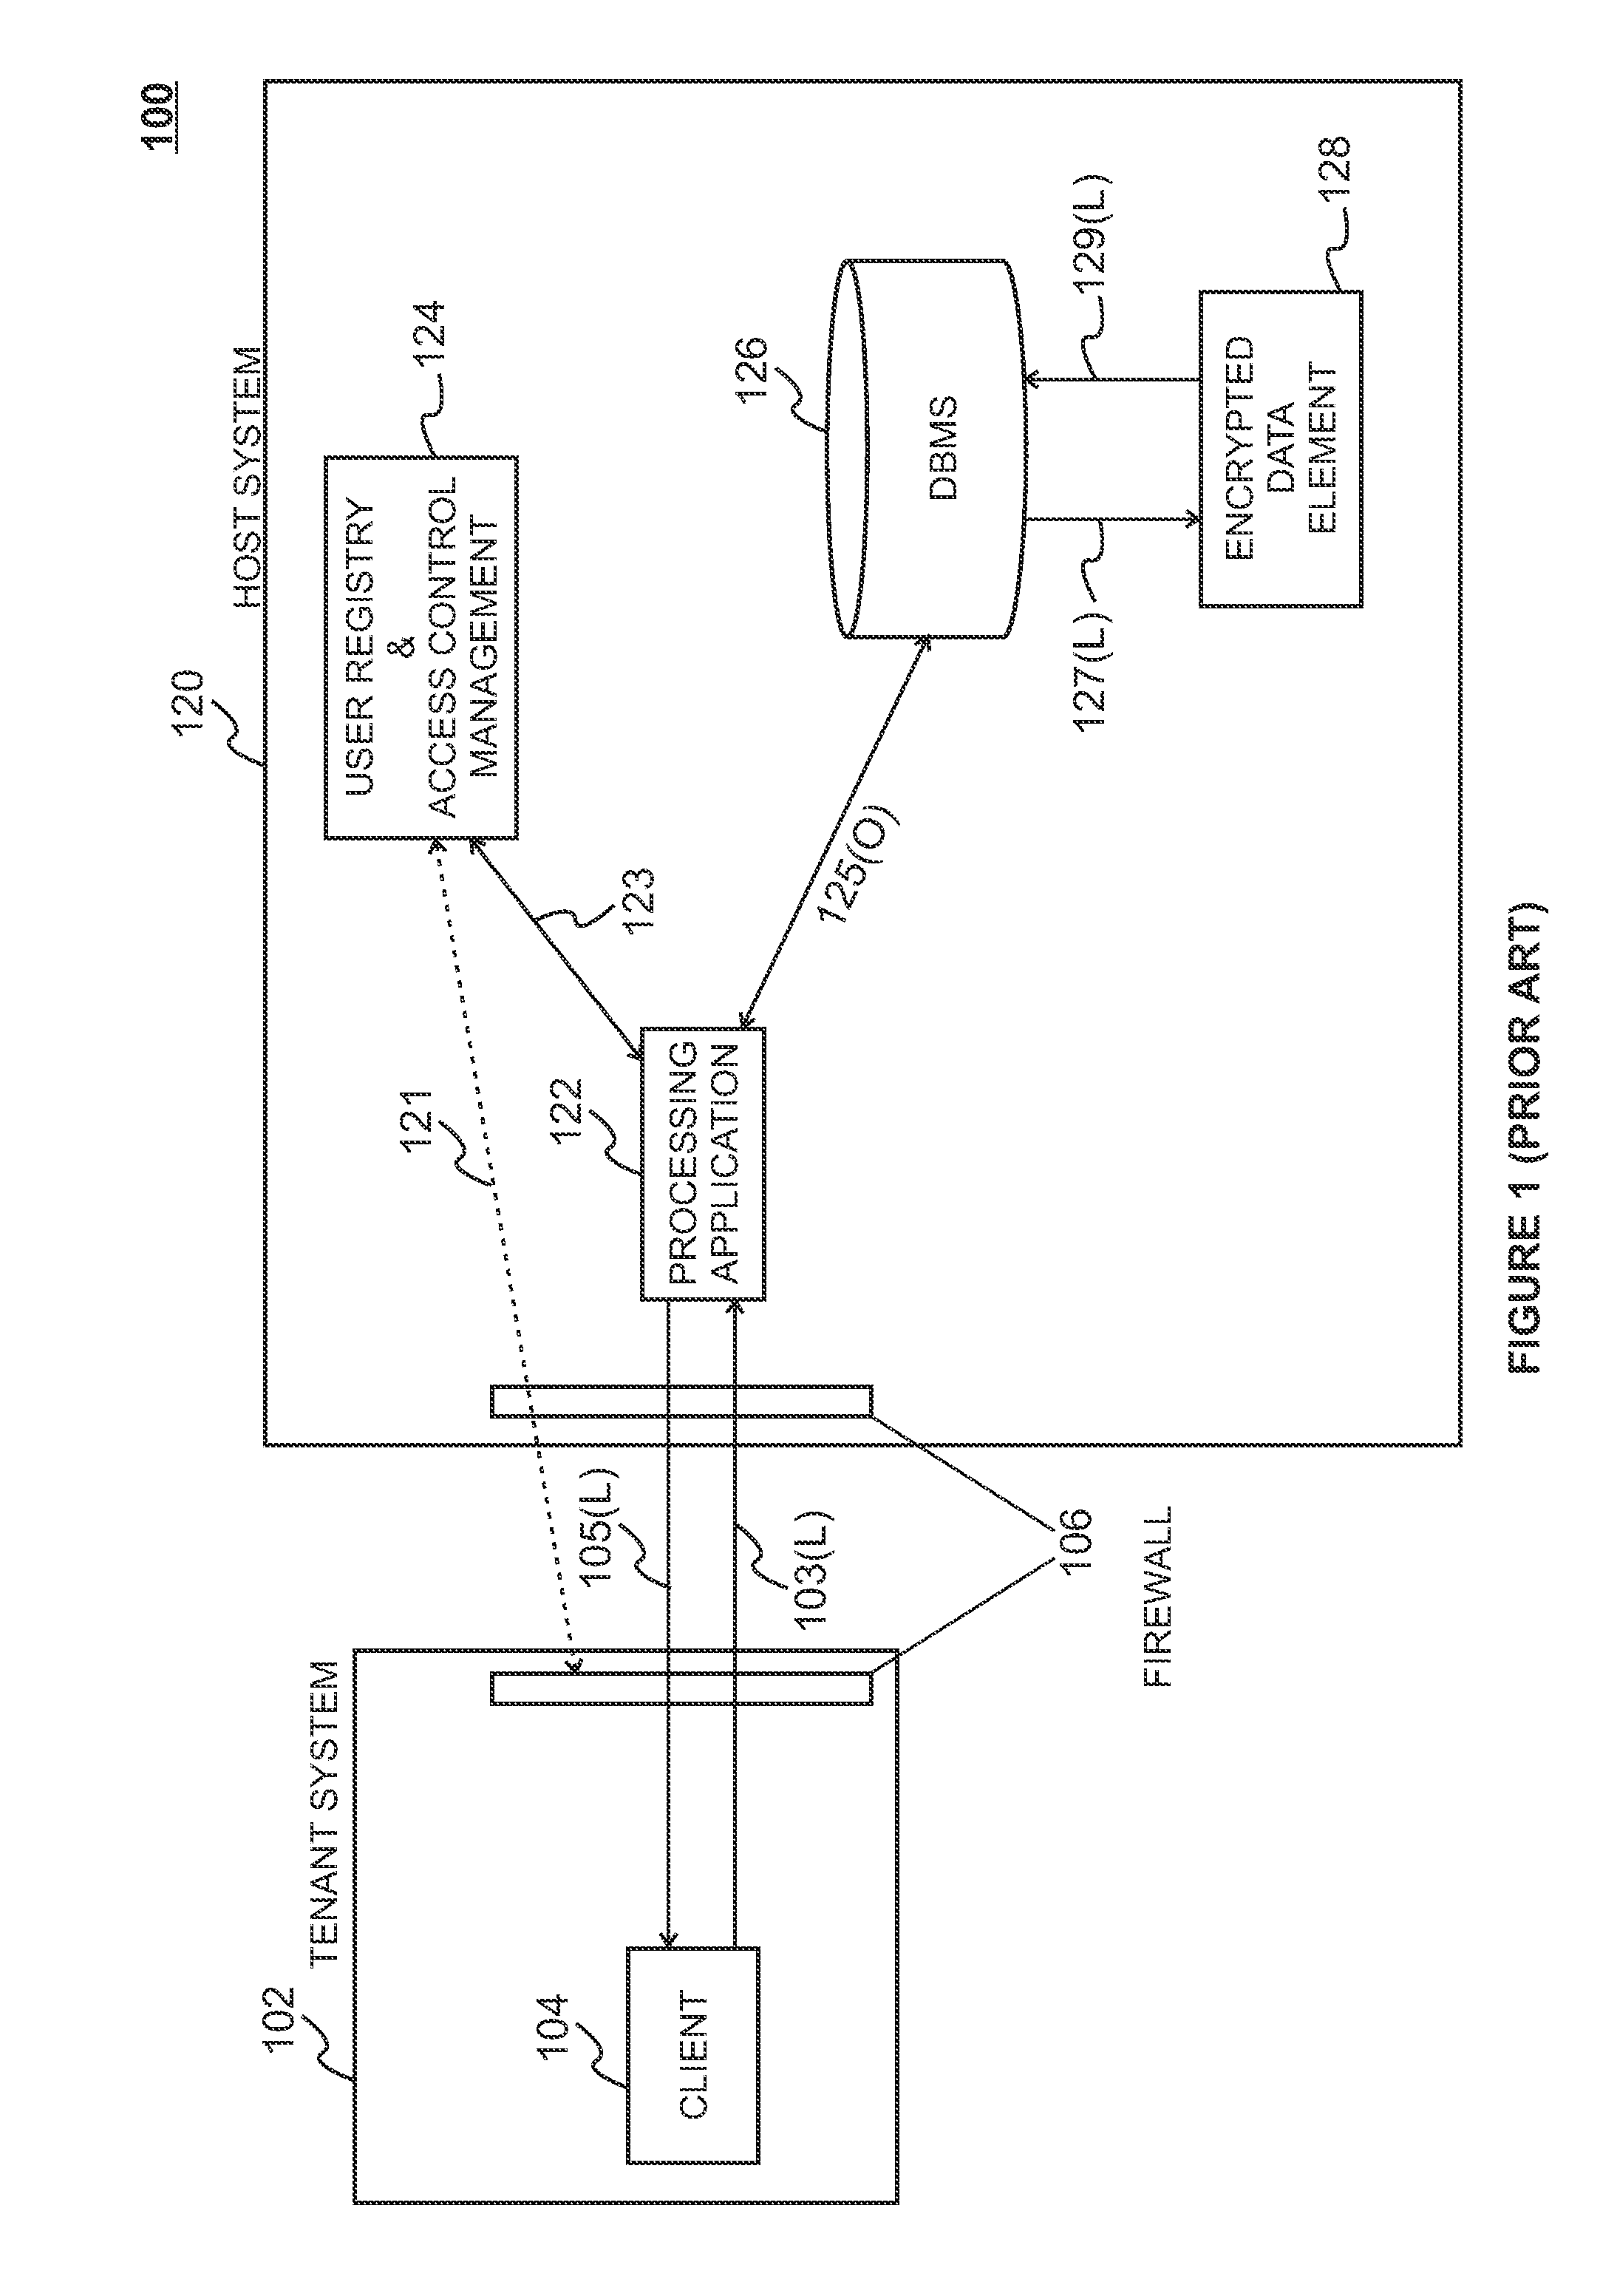 System and method for providing data security in a hosted service system